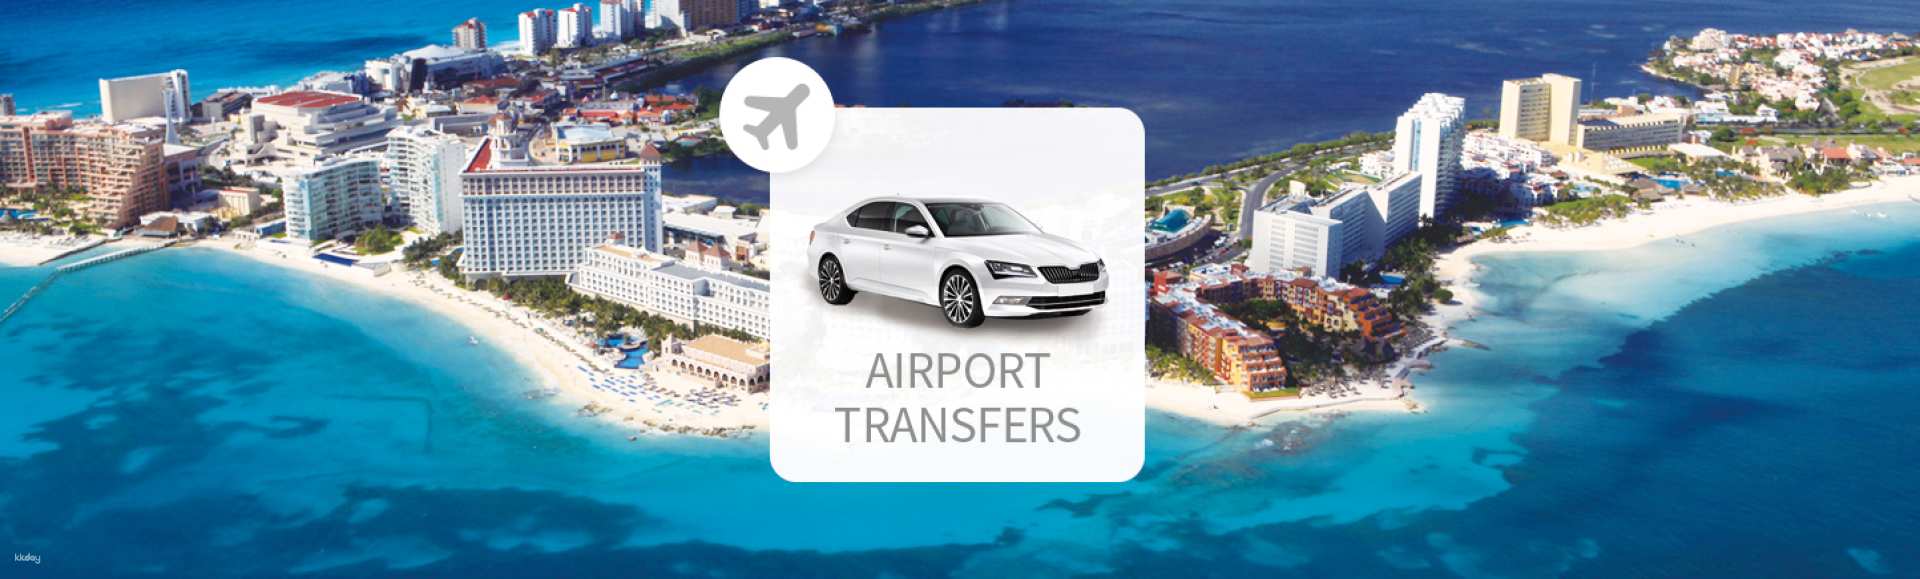 Mexico Cancun International Airport (CUN) Private Transfer to Downtown Cancun with Welcome Service